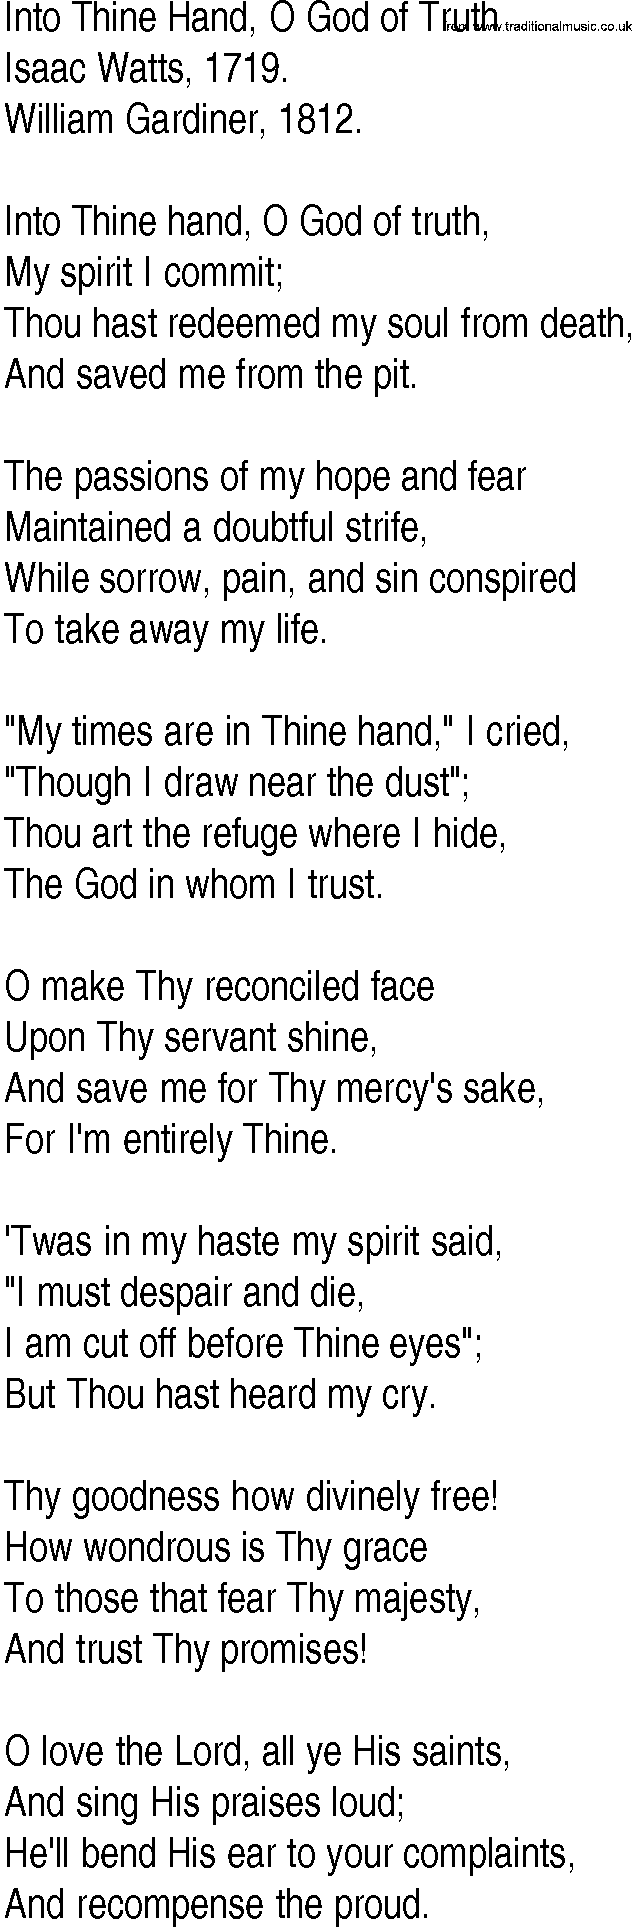 Hymn and Gospel Song: Into Thine Hand, O God of Truth by Isaac Watts lyrics